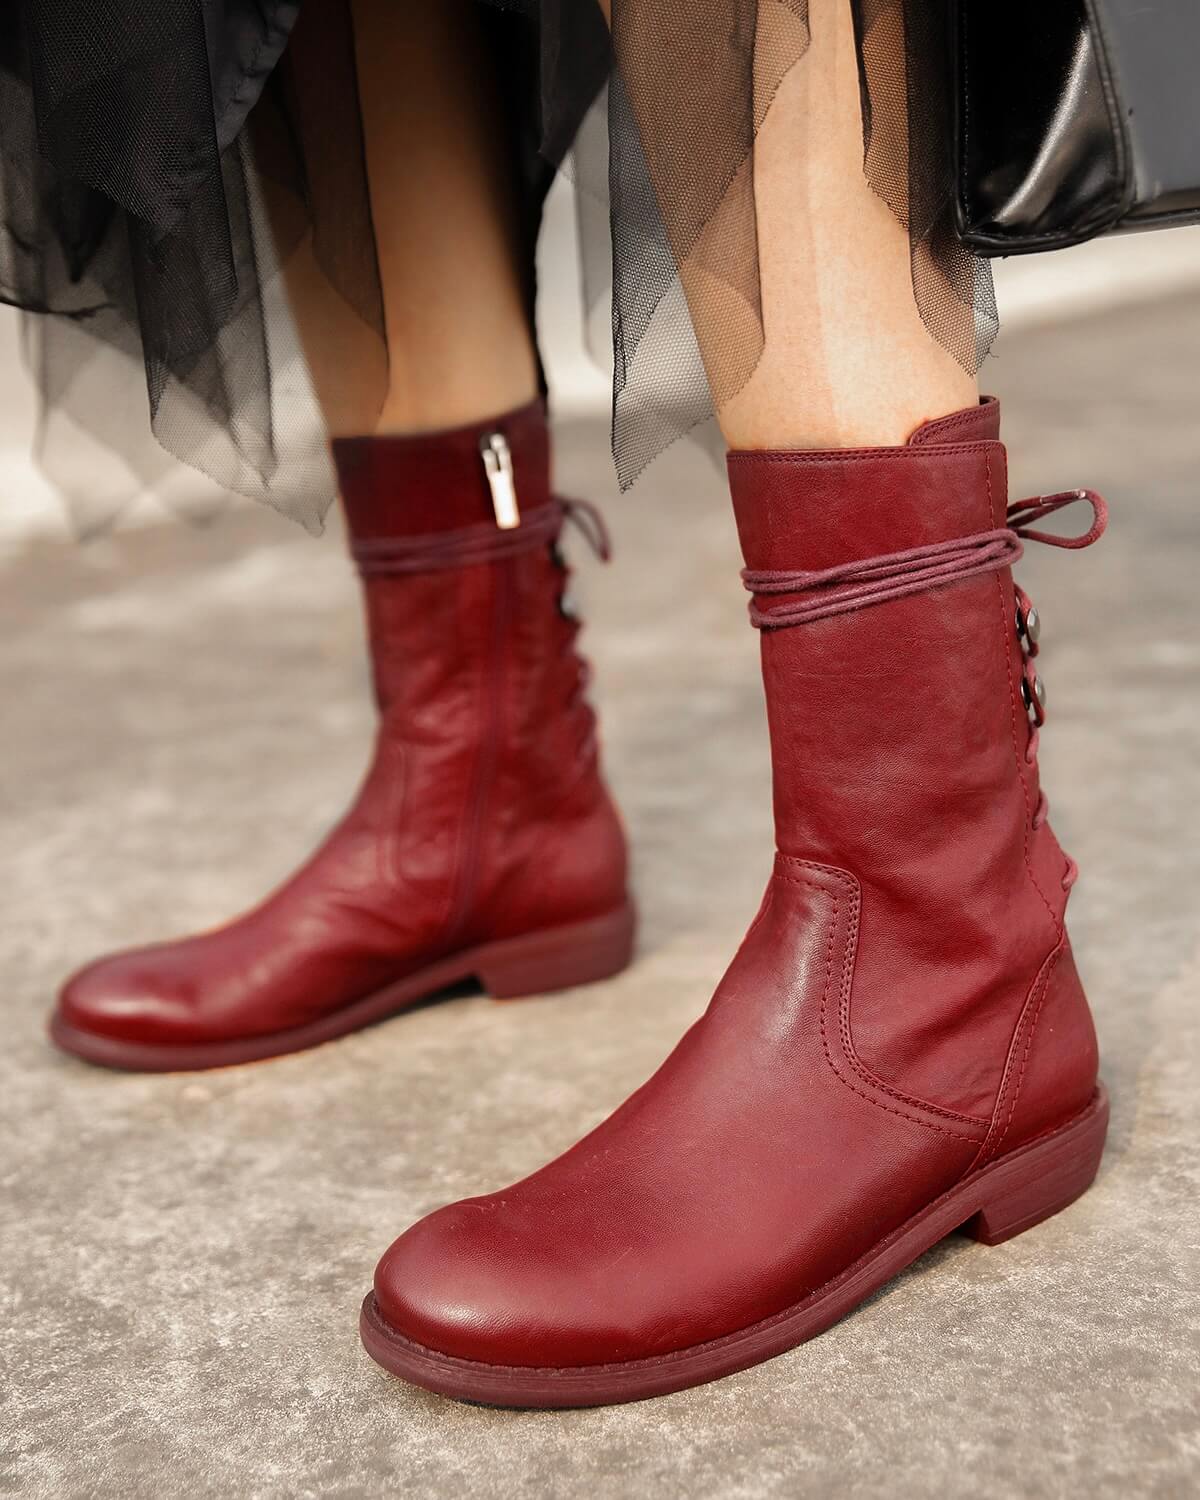 730-horsehide-boots-red-model